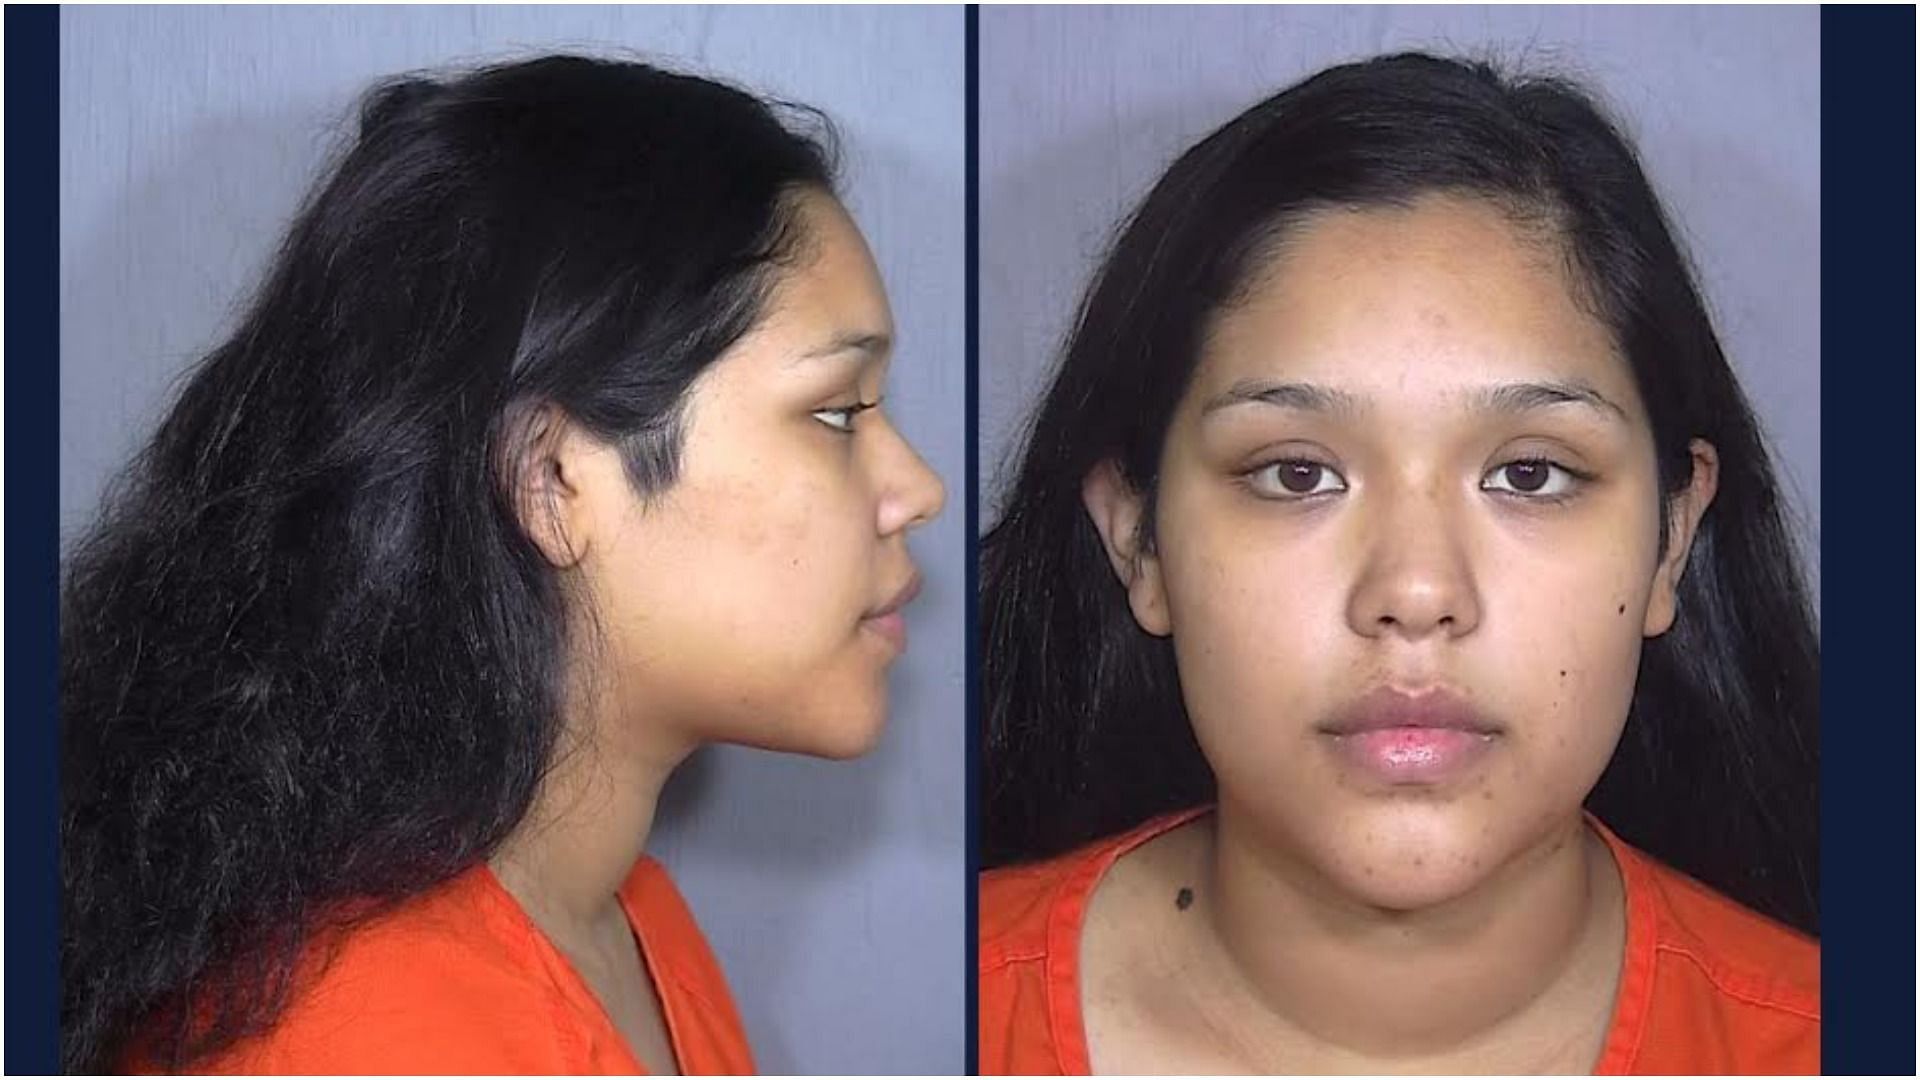 Leiyla Cepeda has been charged with the murder of her newborn baby (image via Colorado State Police Department)